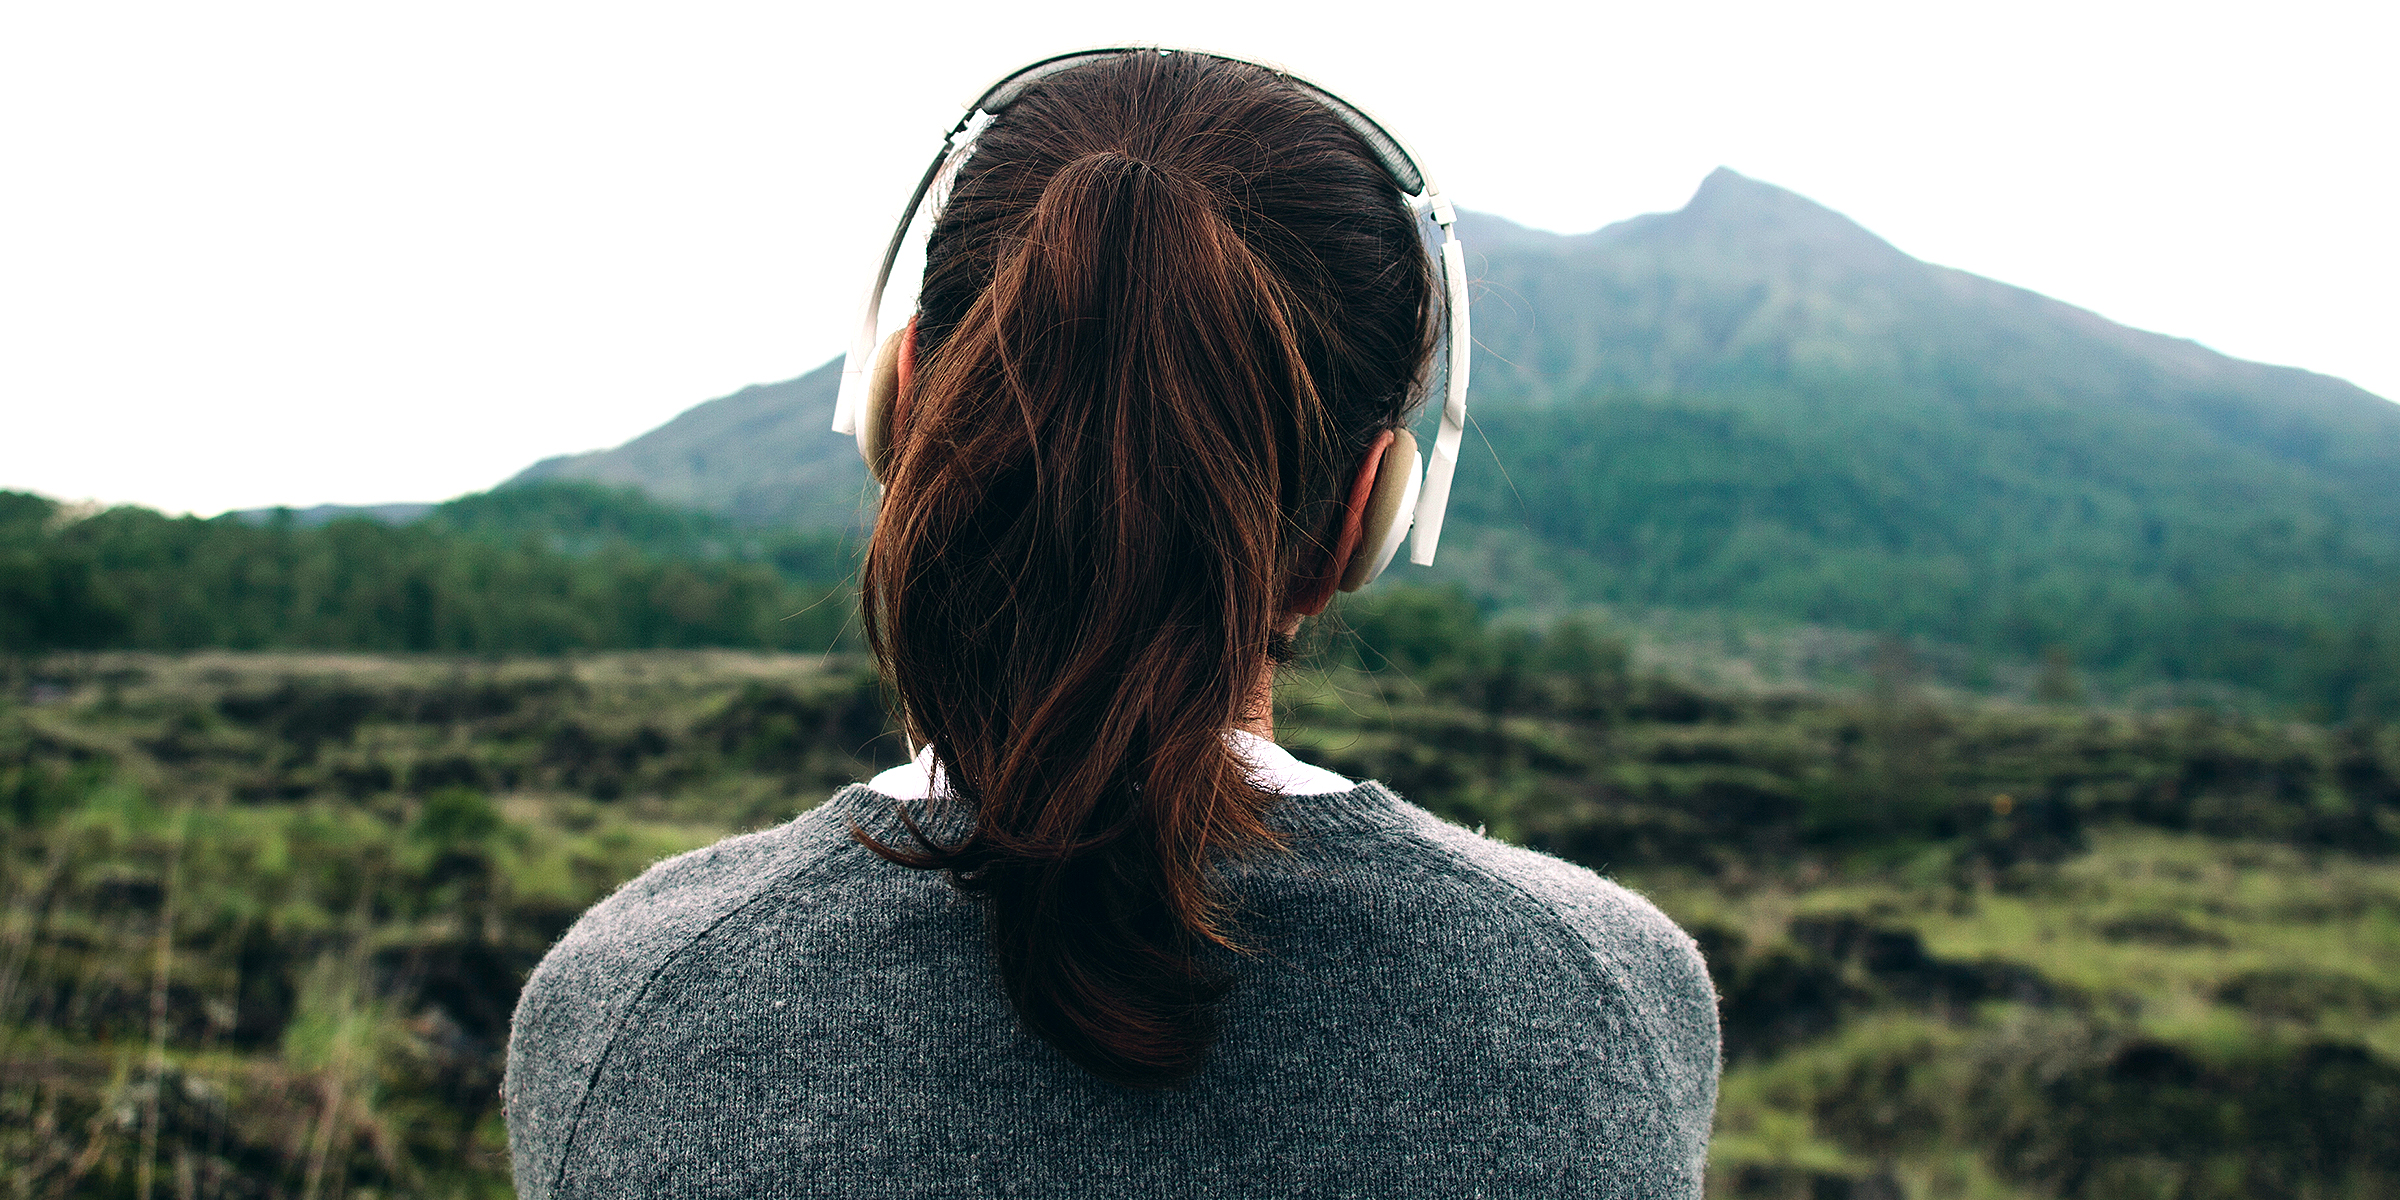 A woman listens to music on top of a mountain | Source: Shutterstock